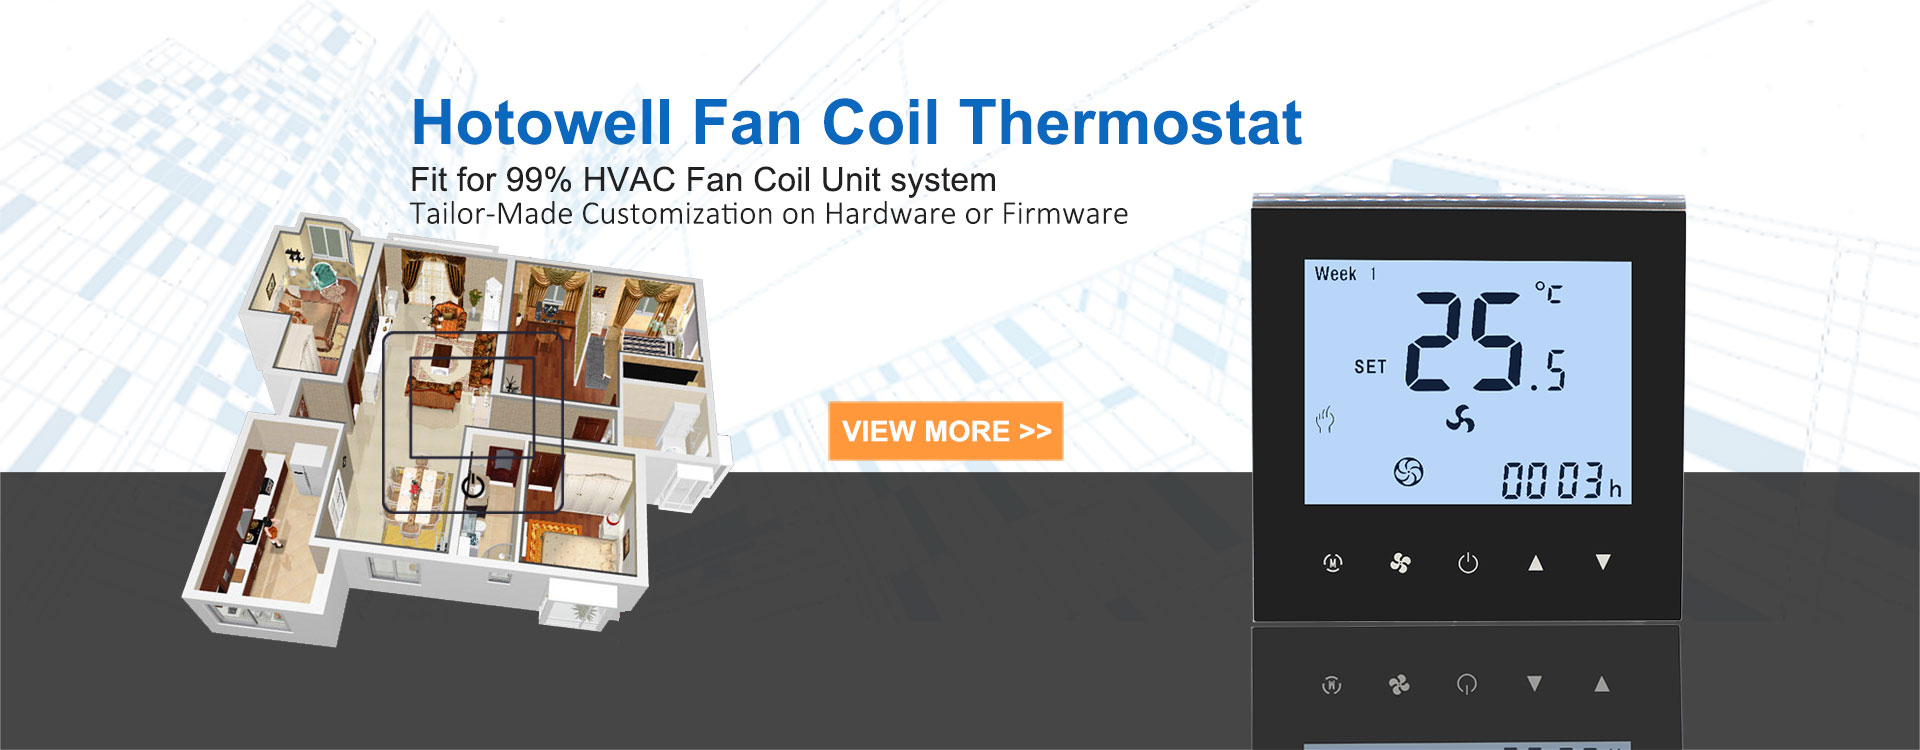 Hotowell Customized Fan coil thermostat